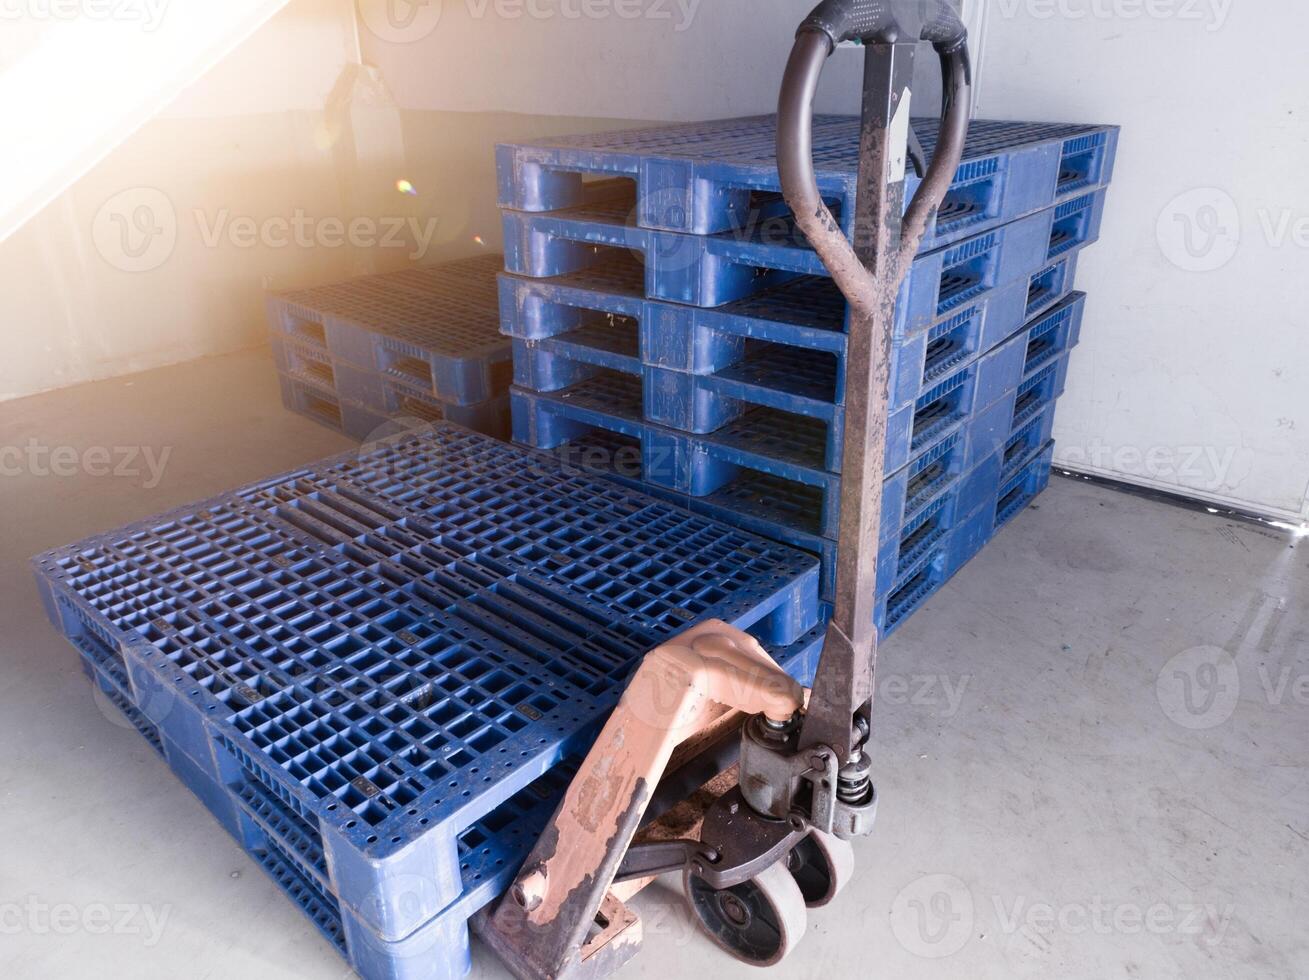 Hand pallet jack and some blue pallet on the distribution warehouse area. photo